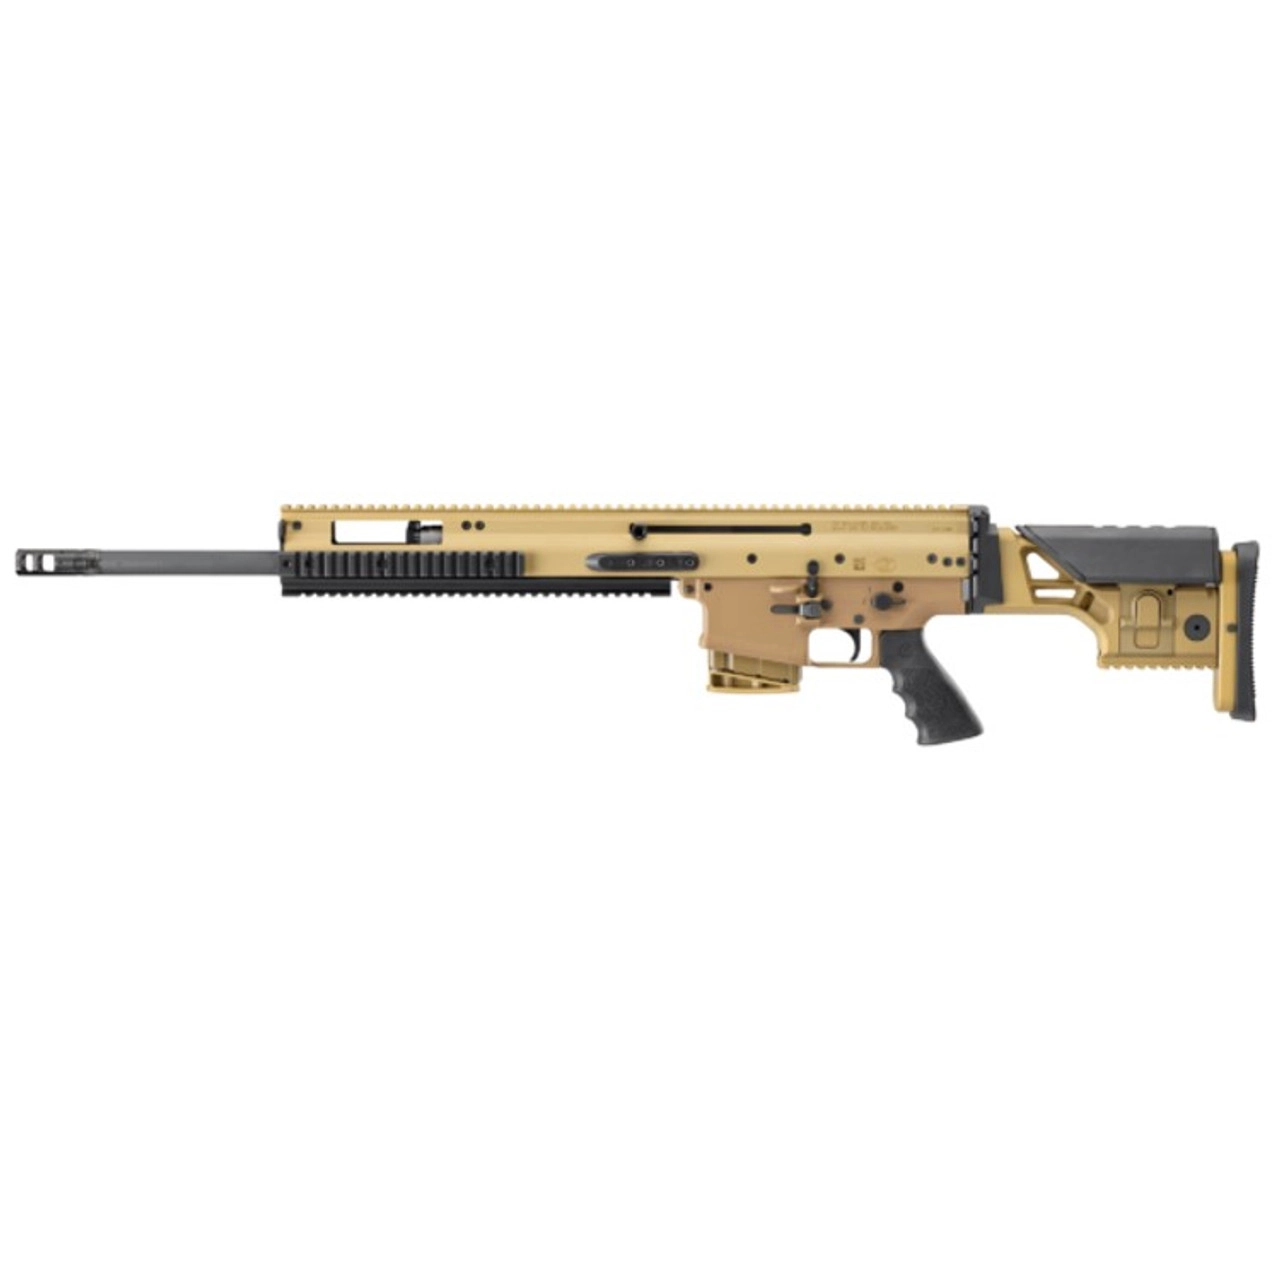 FN Scar 20S For Sale